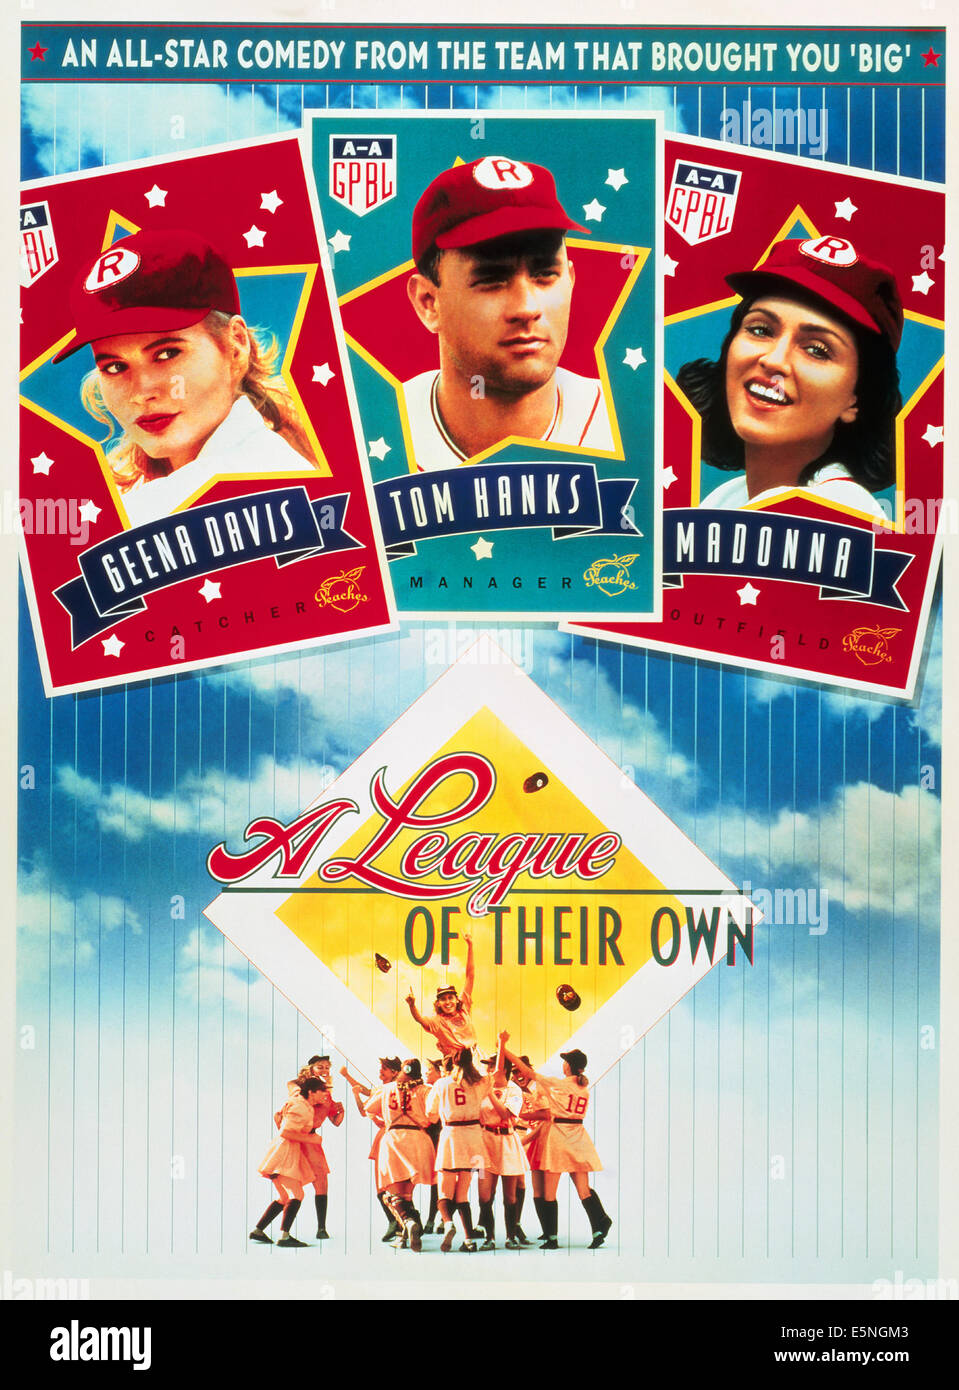 A LEAGUE OF THEIR OWN, Geena Davis, Tom Hanks, Madonna, 1992. (c) Columbia  Pictures/ Courtesy: Everett Collection Stock Photo - Alamy